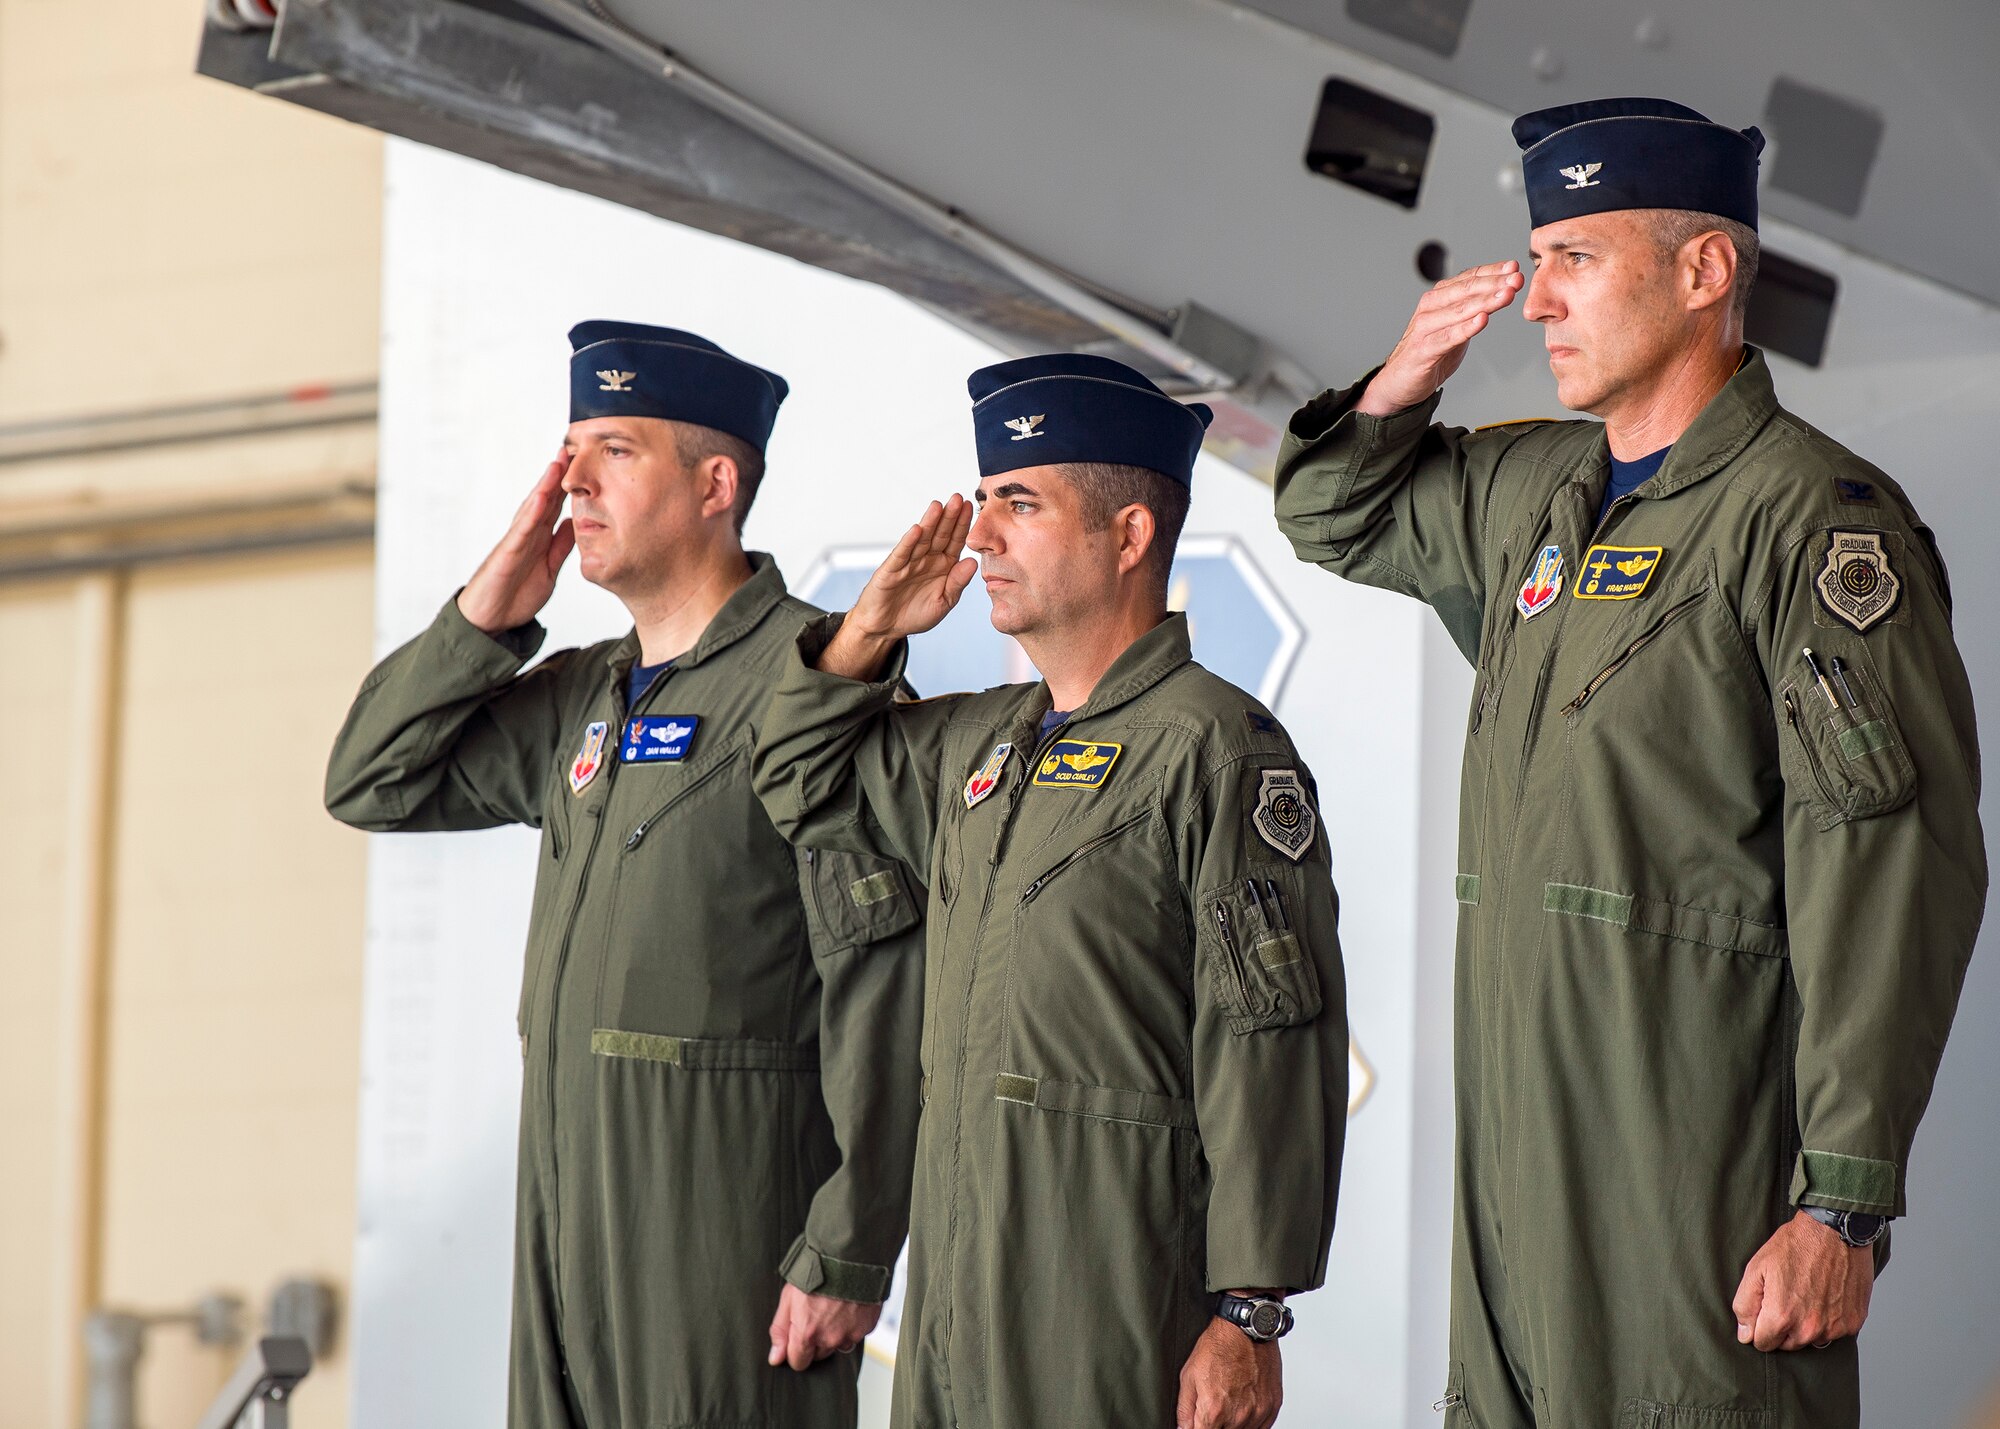 Wing leadership render salutes for the playing of the national anthem during a change of command ceremony, July 19, 2019, at Moody Air Force Base, Ga. The ceremony is a military tradition that represents a formal transfer of unit’s authority and responsibility from one commander to another. (U.S. Air Force photo by Airman 1st Class Eugene Oliver)